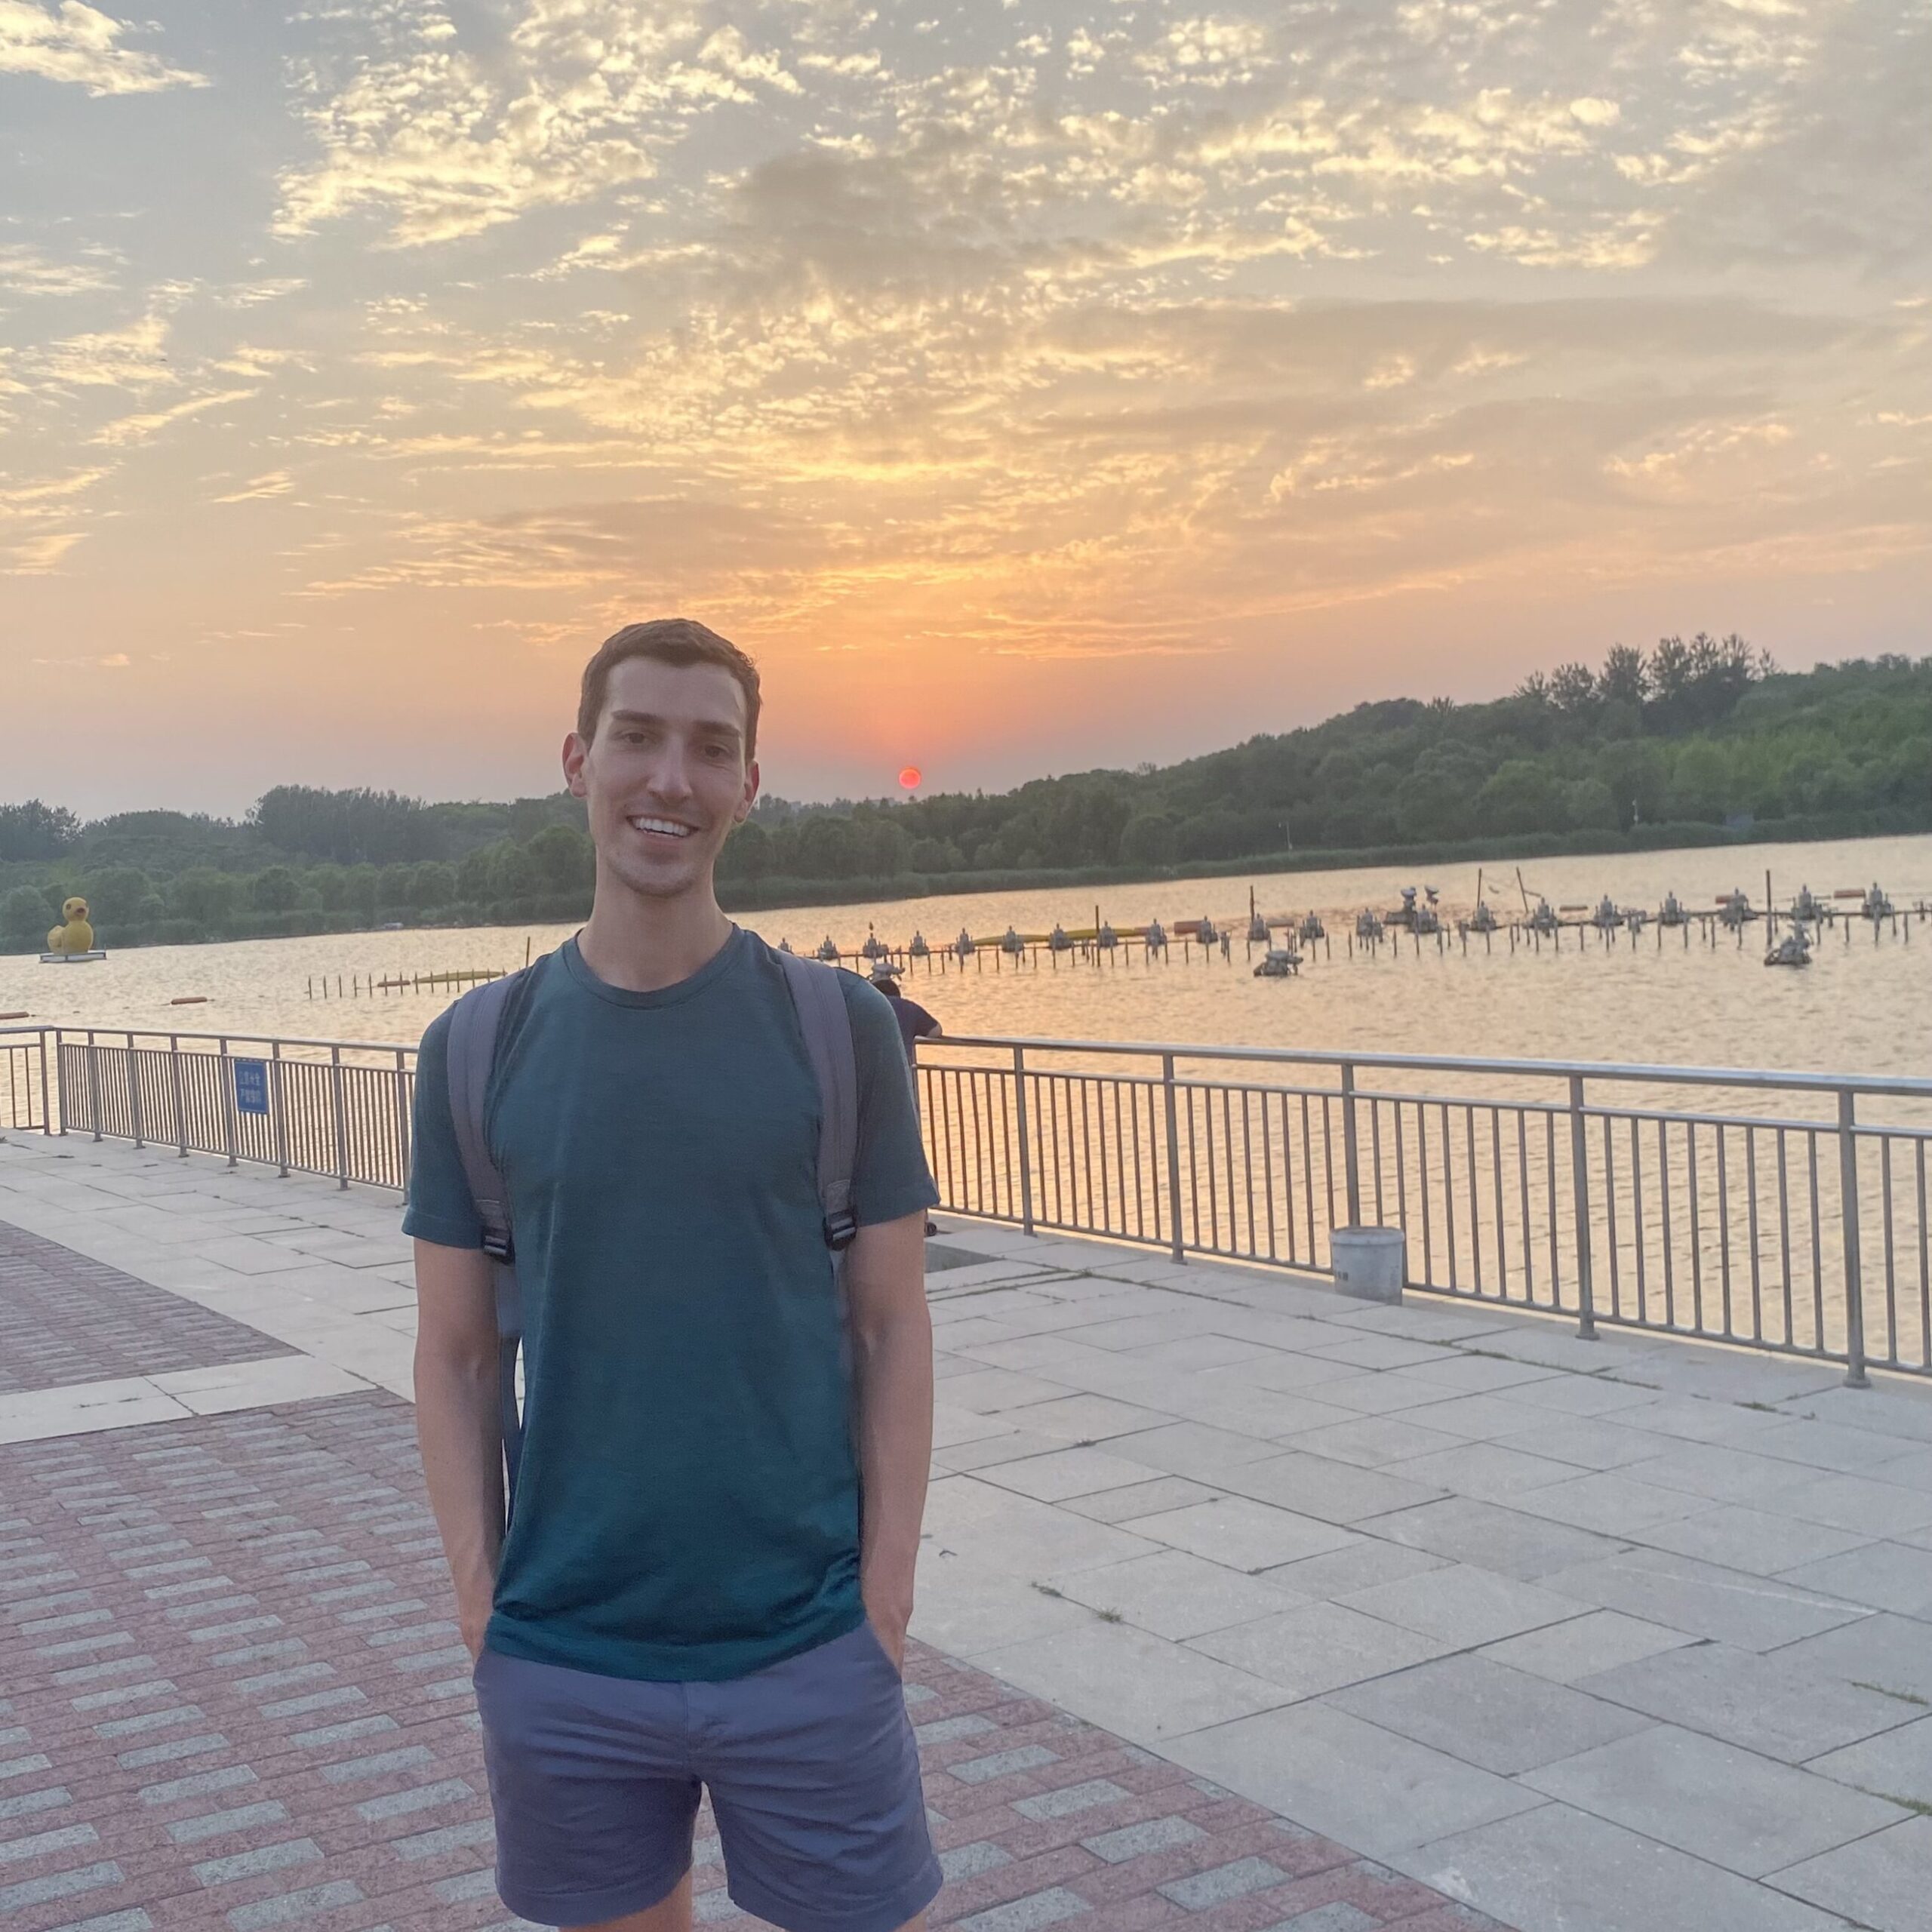 Man smiling in front of sunset